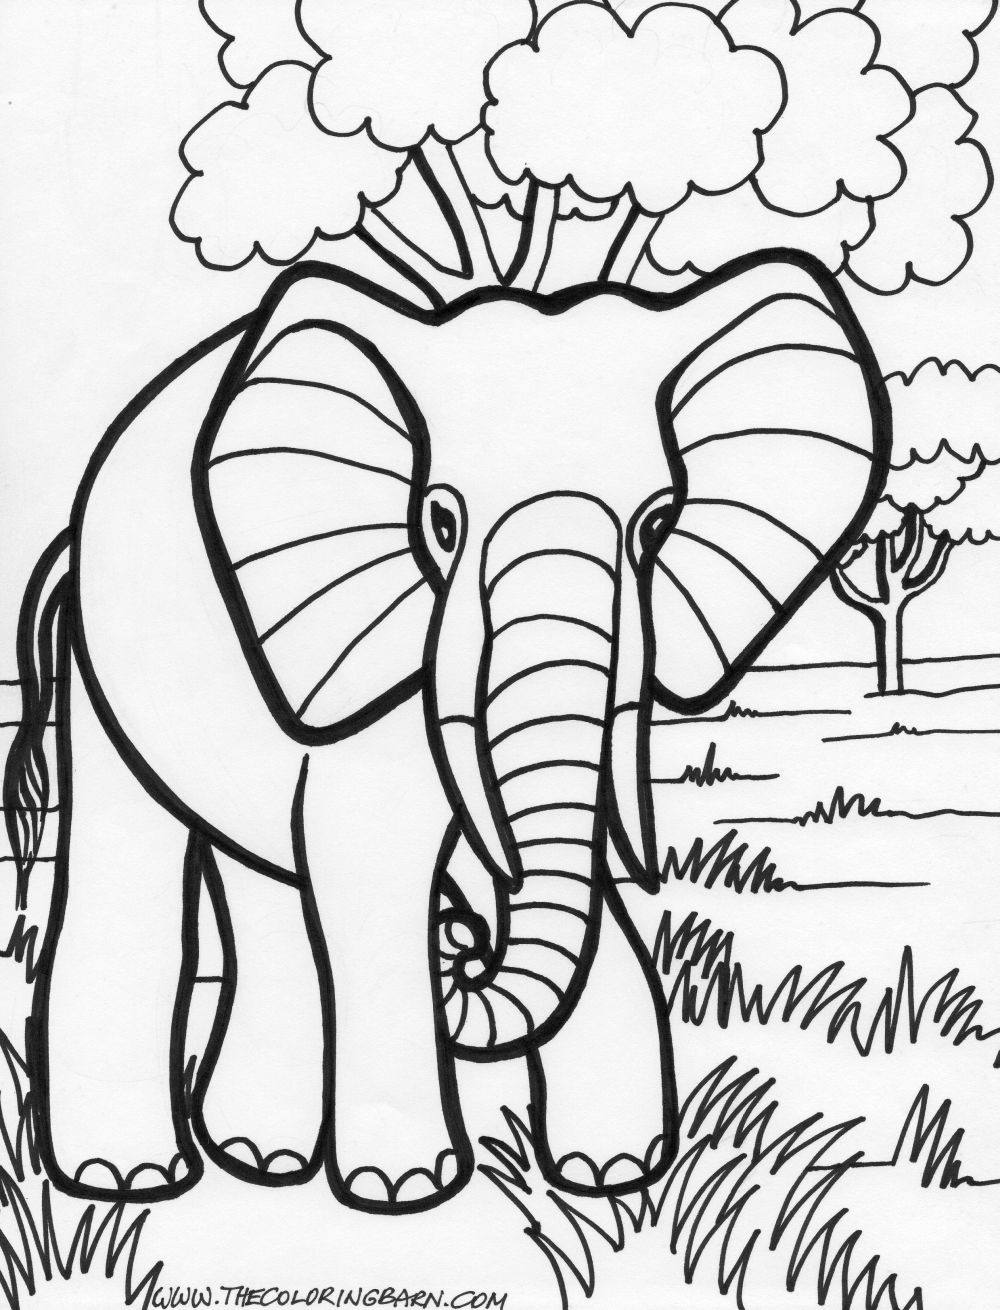 Elephant Coloring Pages For Kids
 Jarvis Varnado 14 Elephant Coloring Pages for Kids